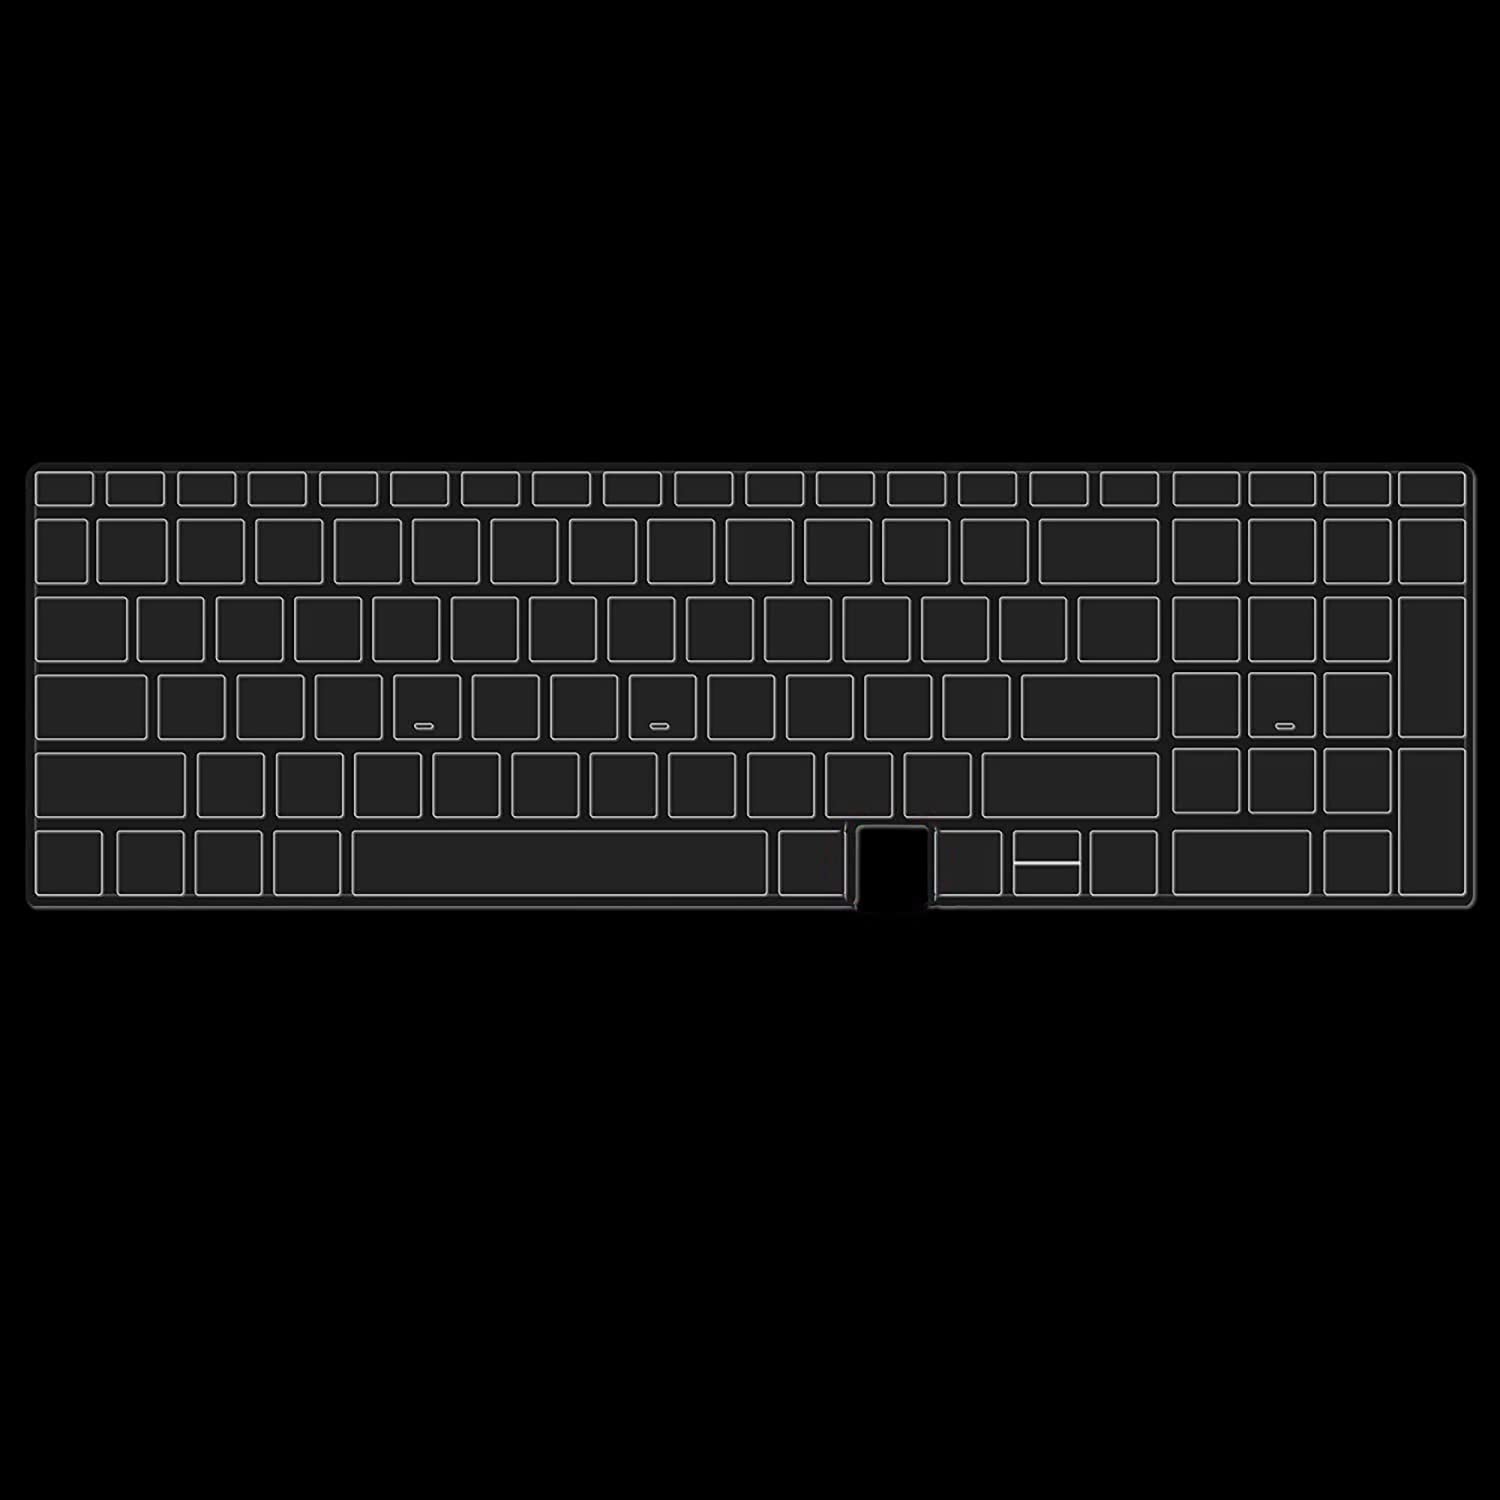 Silicone Keyboard Skin Cover for HP Envy 17.3